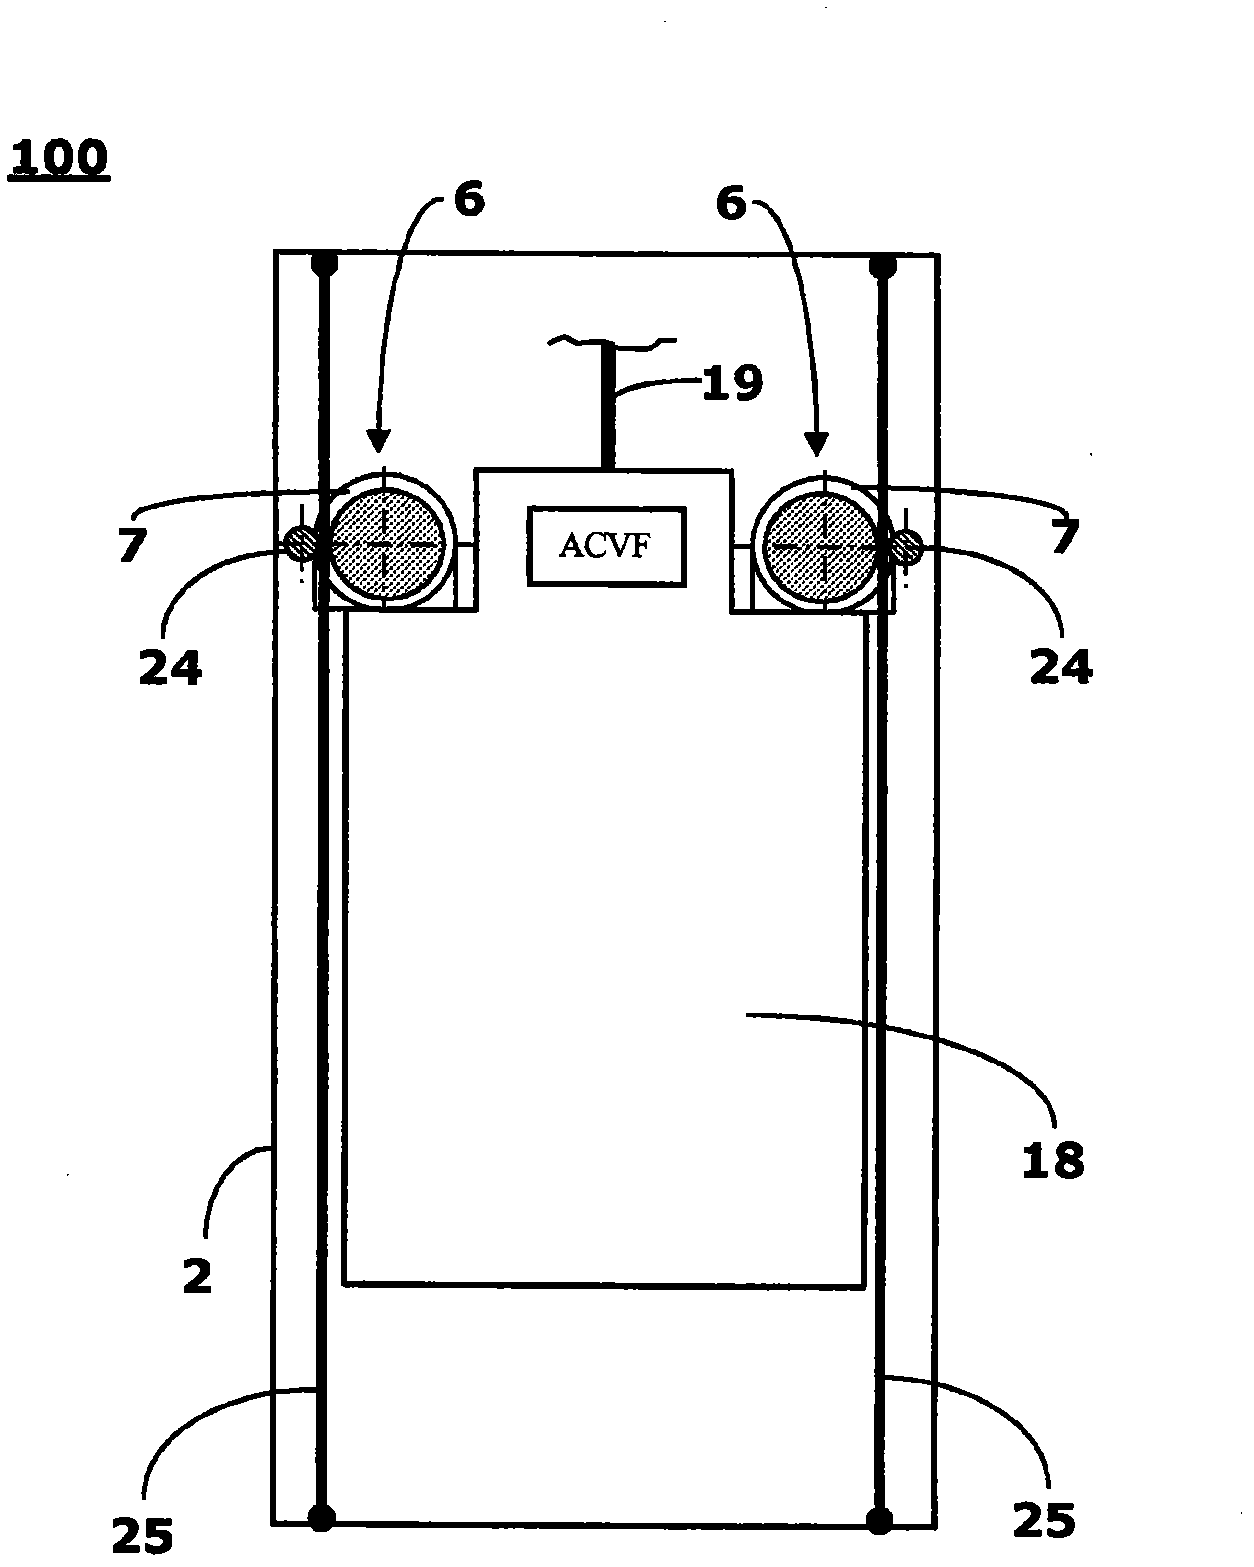 Elevator system with automotive counterweight